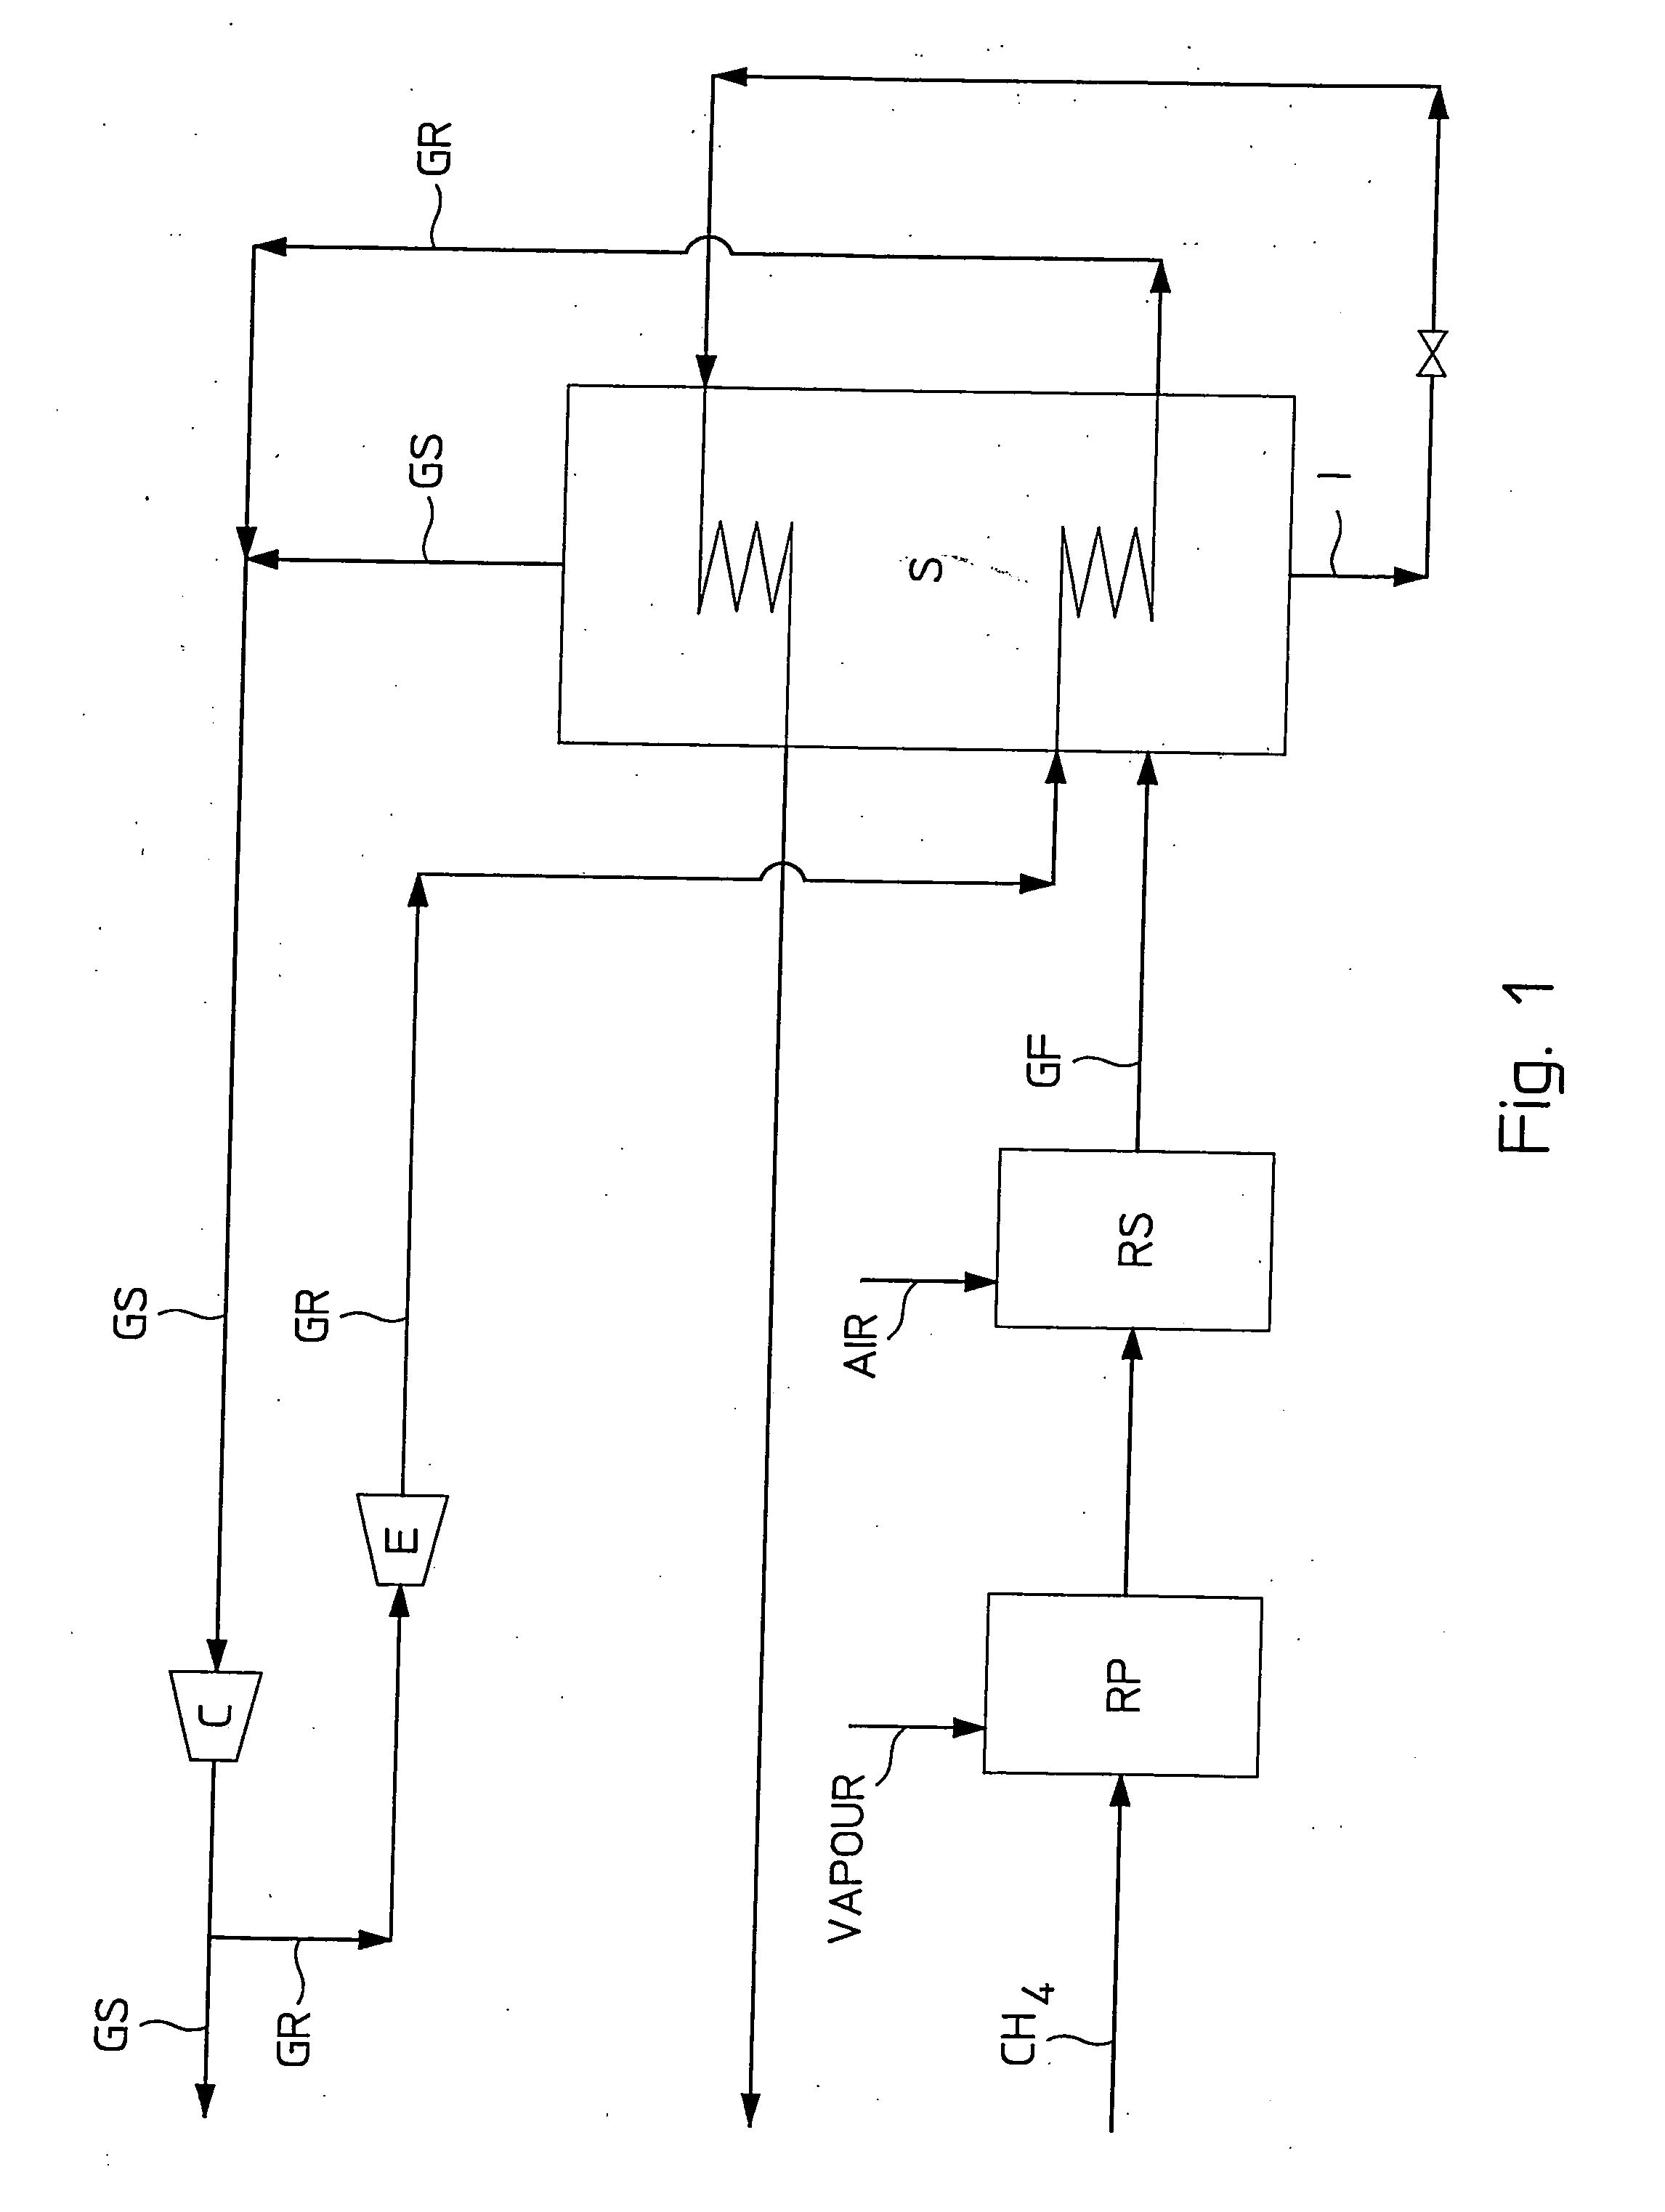 Process for synthesis gas production